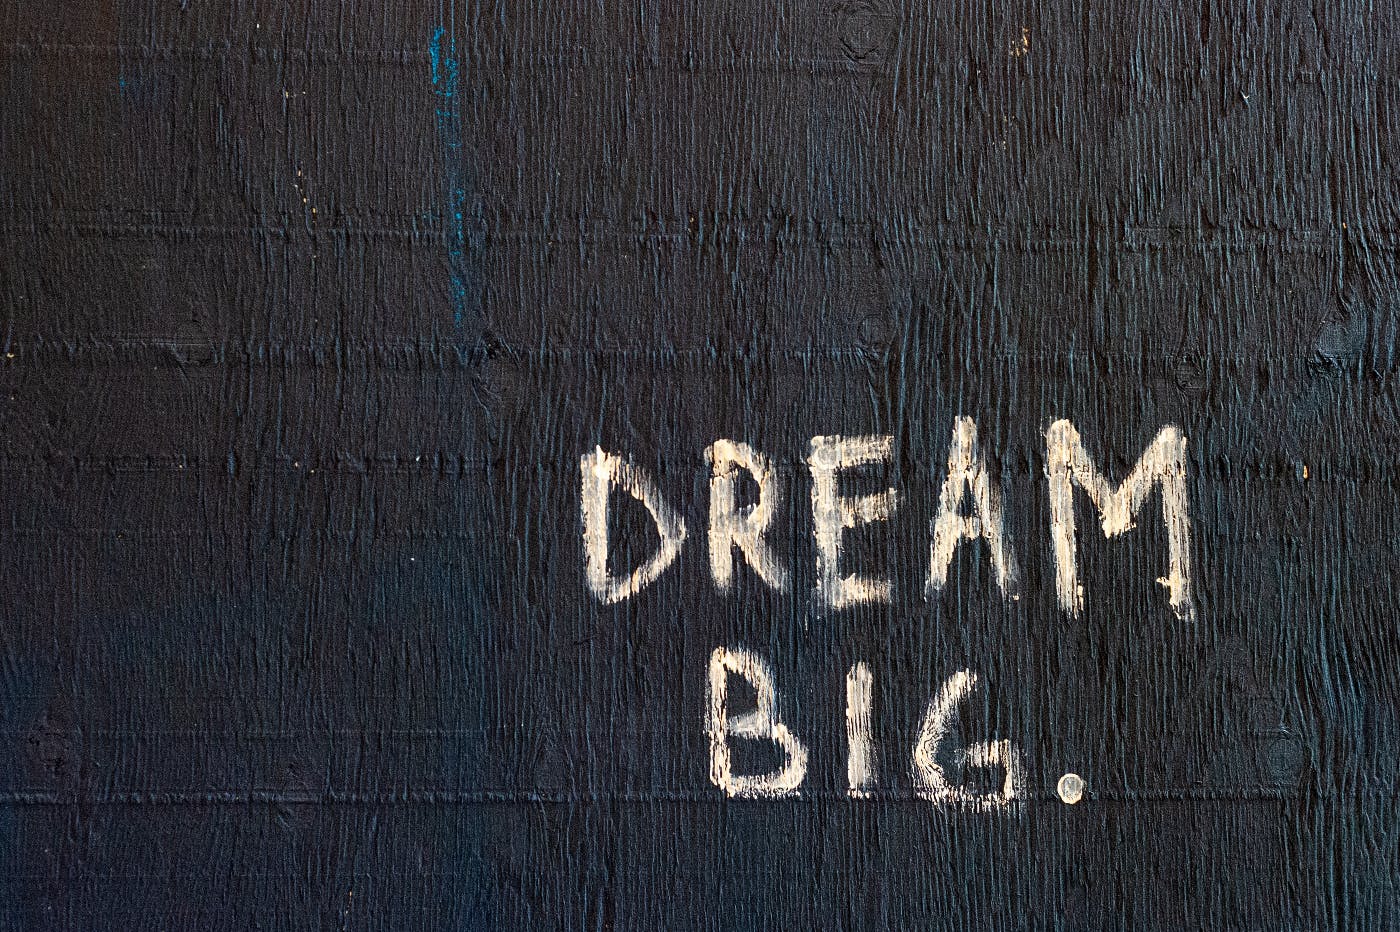 A black wall with Dream Big written in chalk.